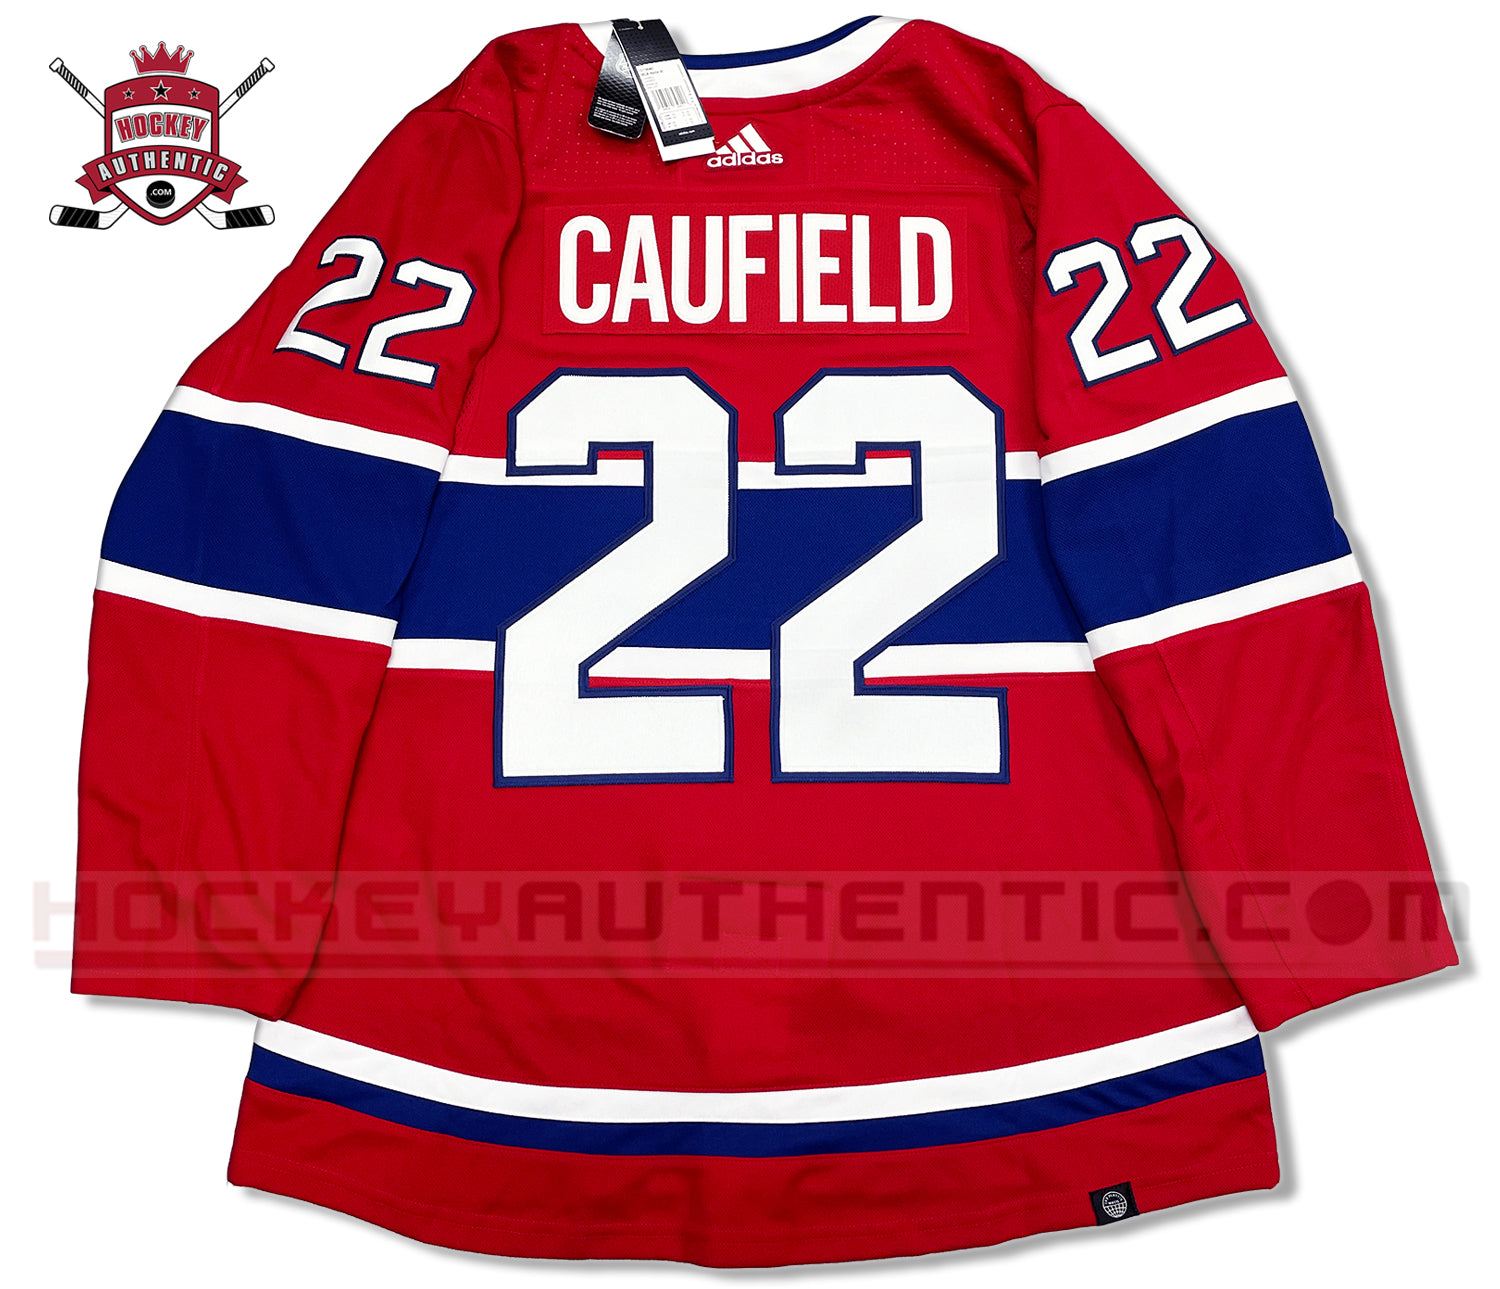 Rookie Designer Attempts a Montreal Canadiens Jersey. Let me know